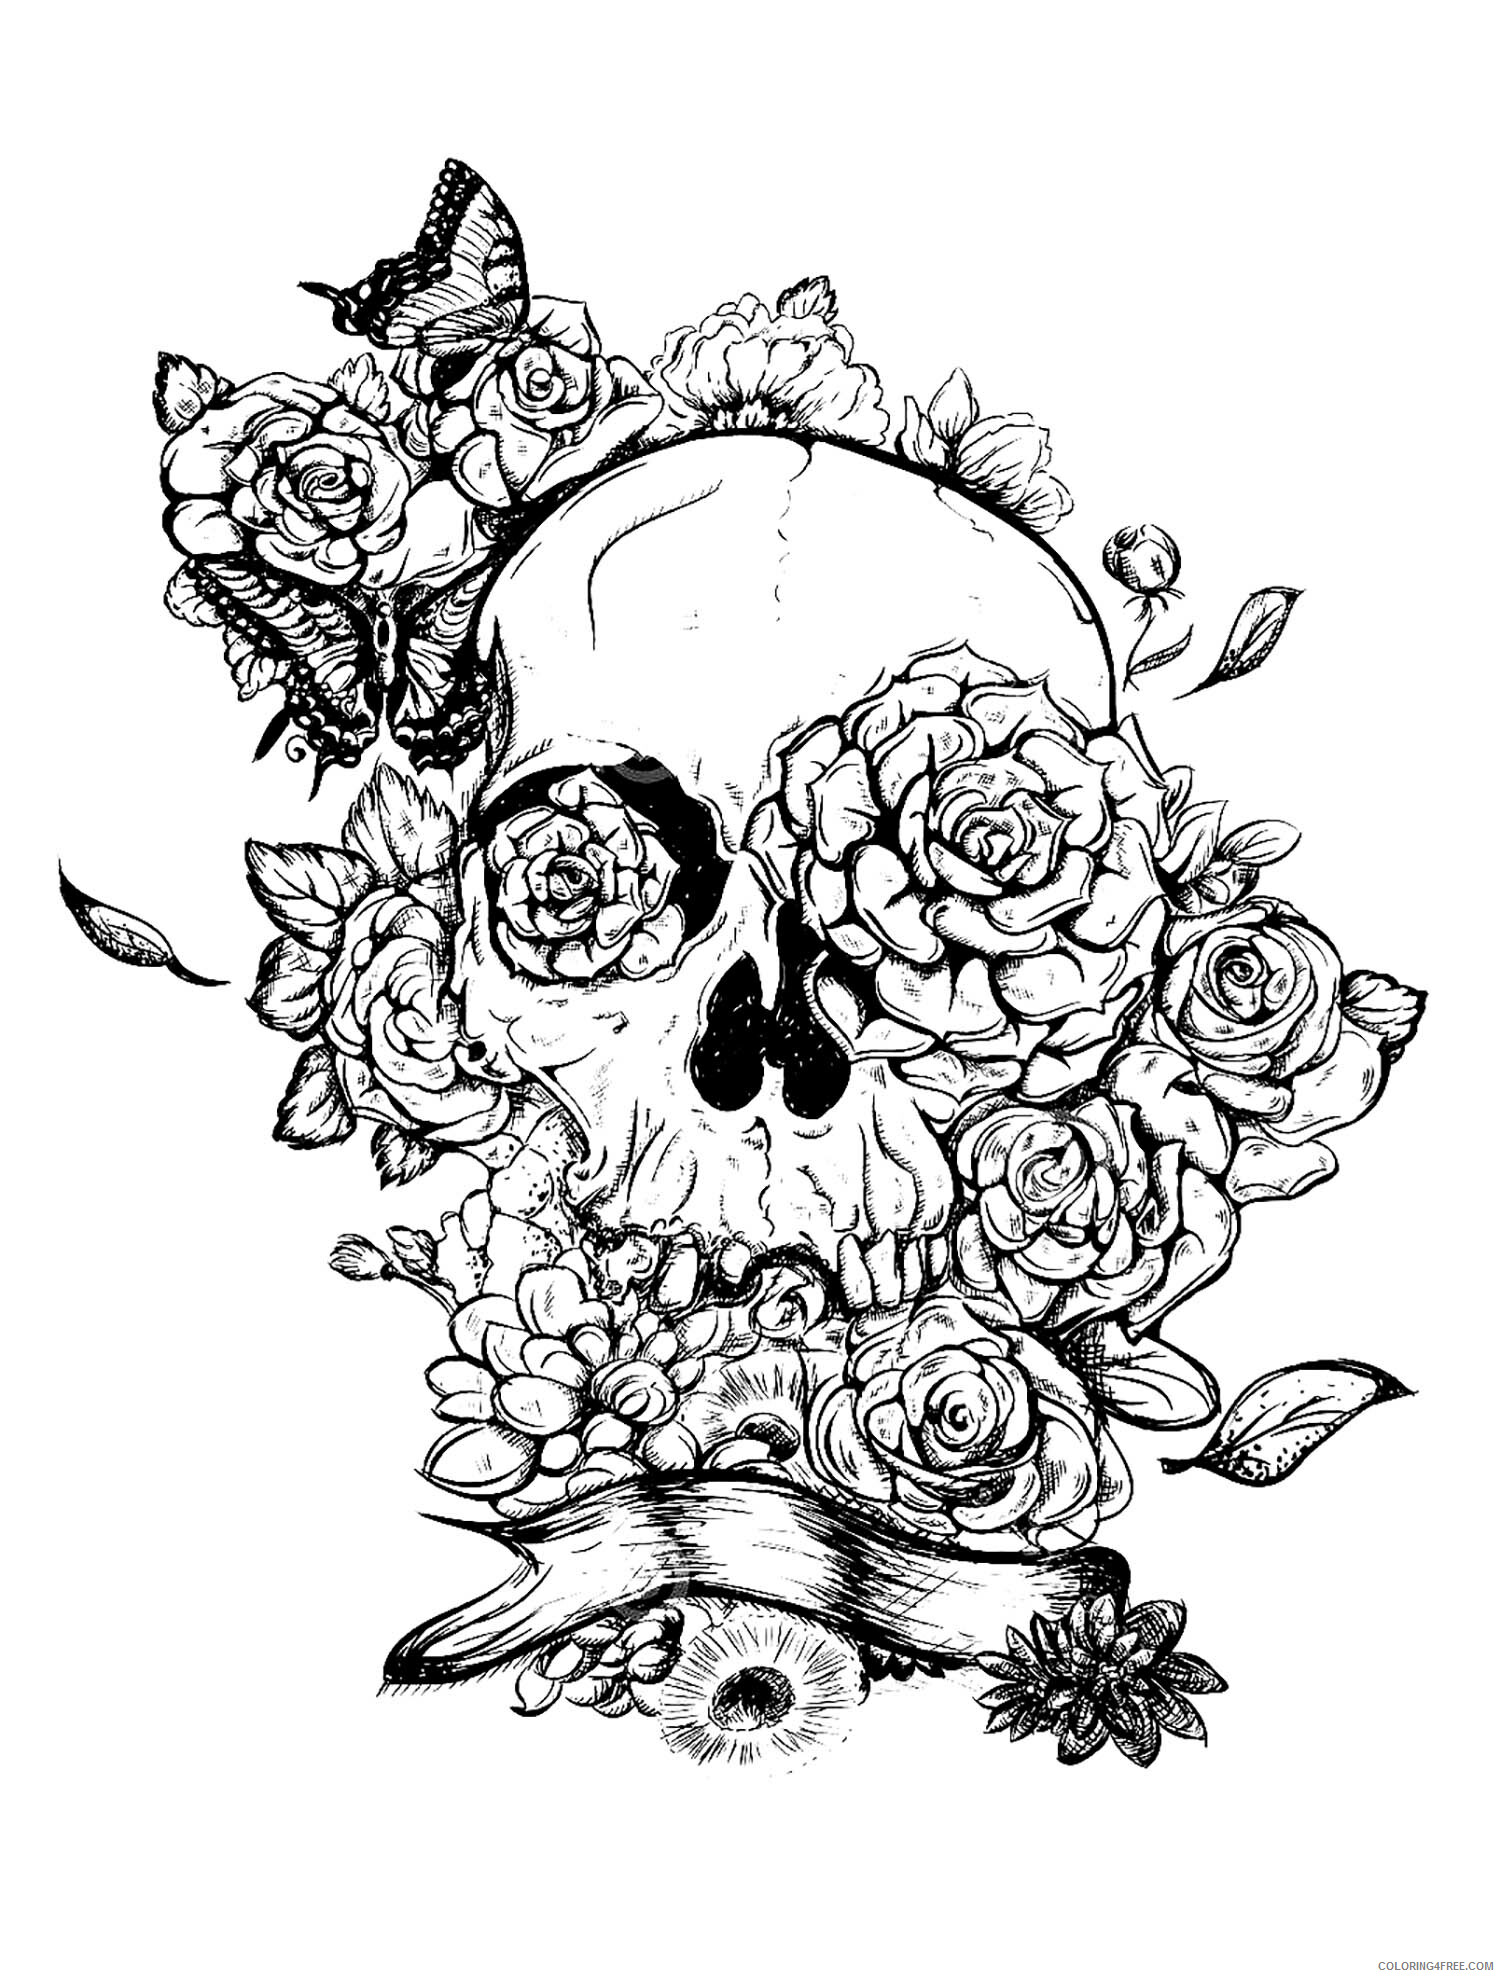 Adult Coloring Pages Kull and Roses Tattoo for Adults Printable 2020 041 Coloring4free